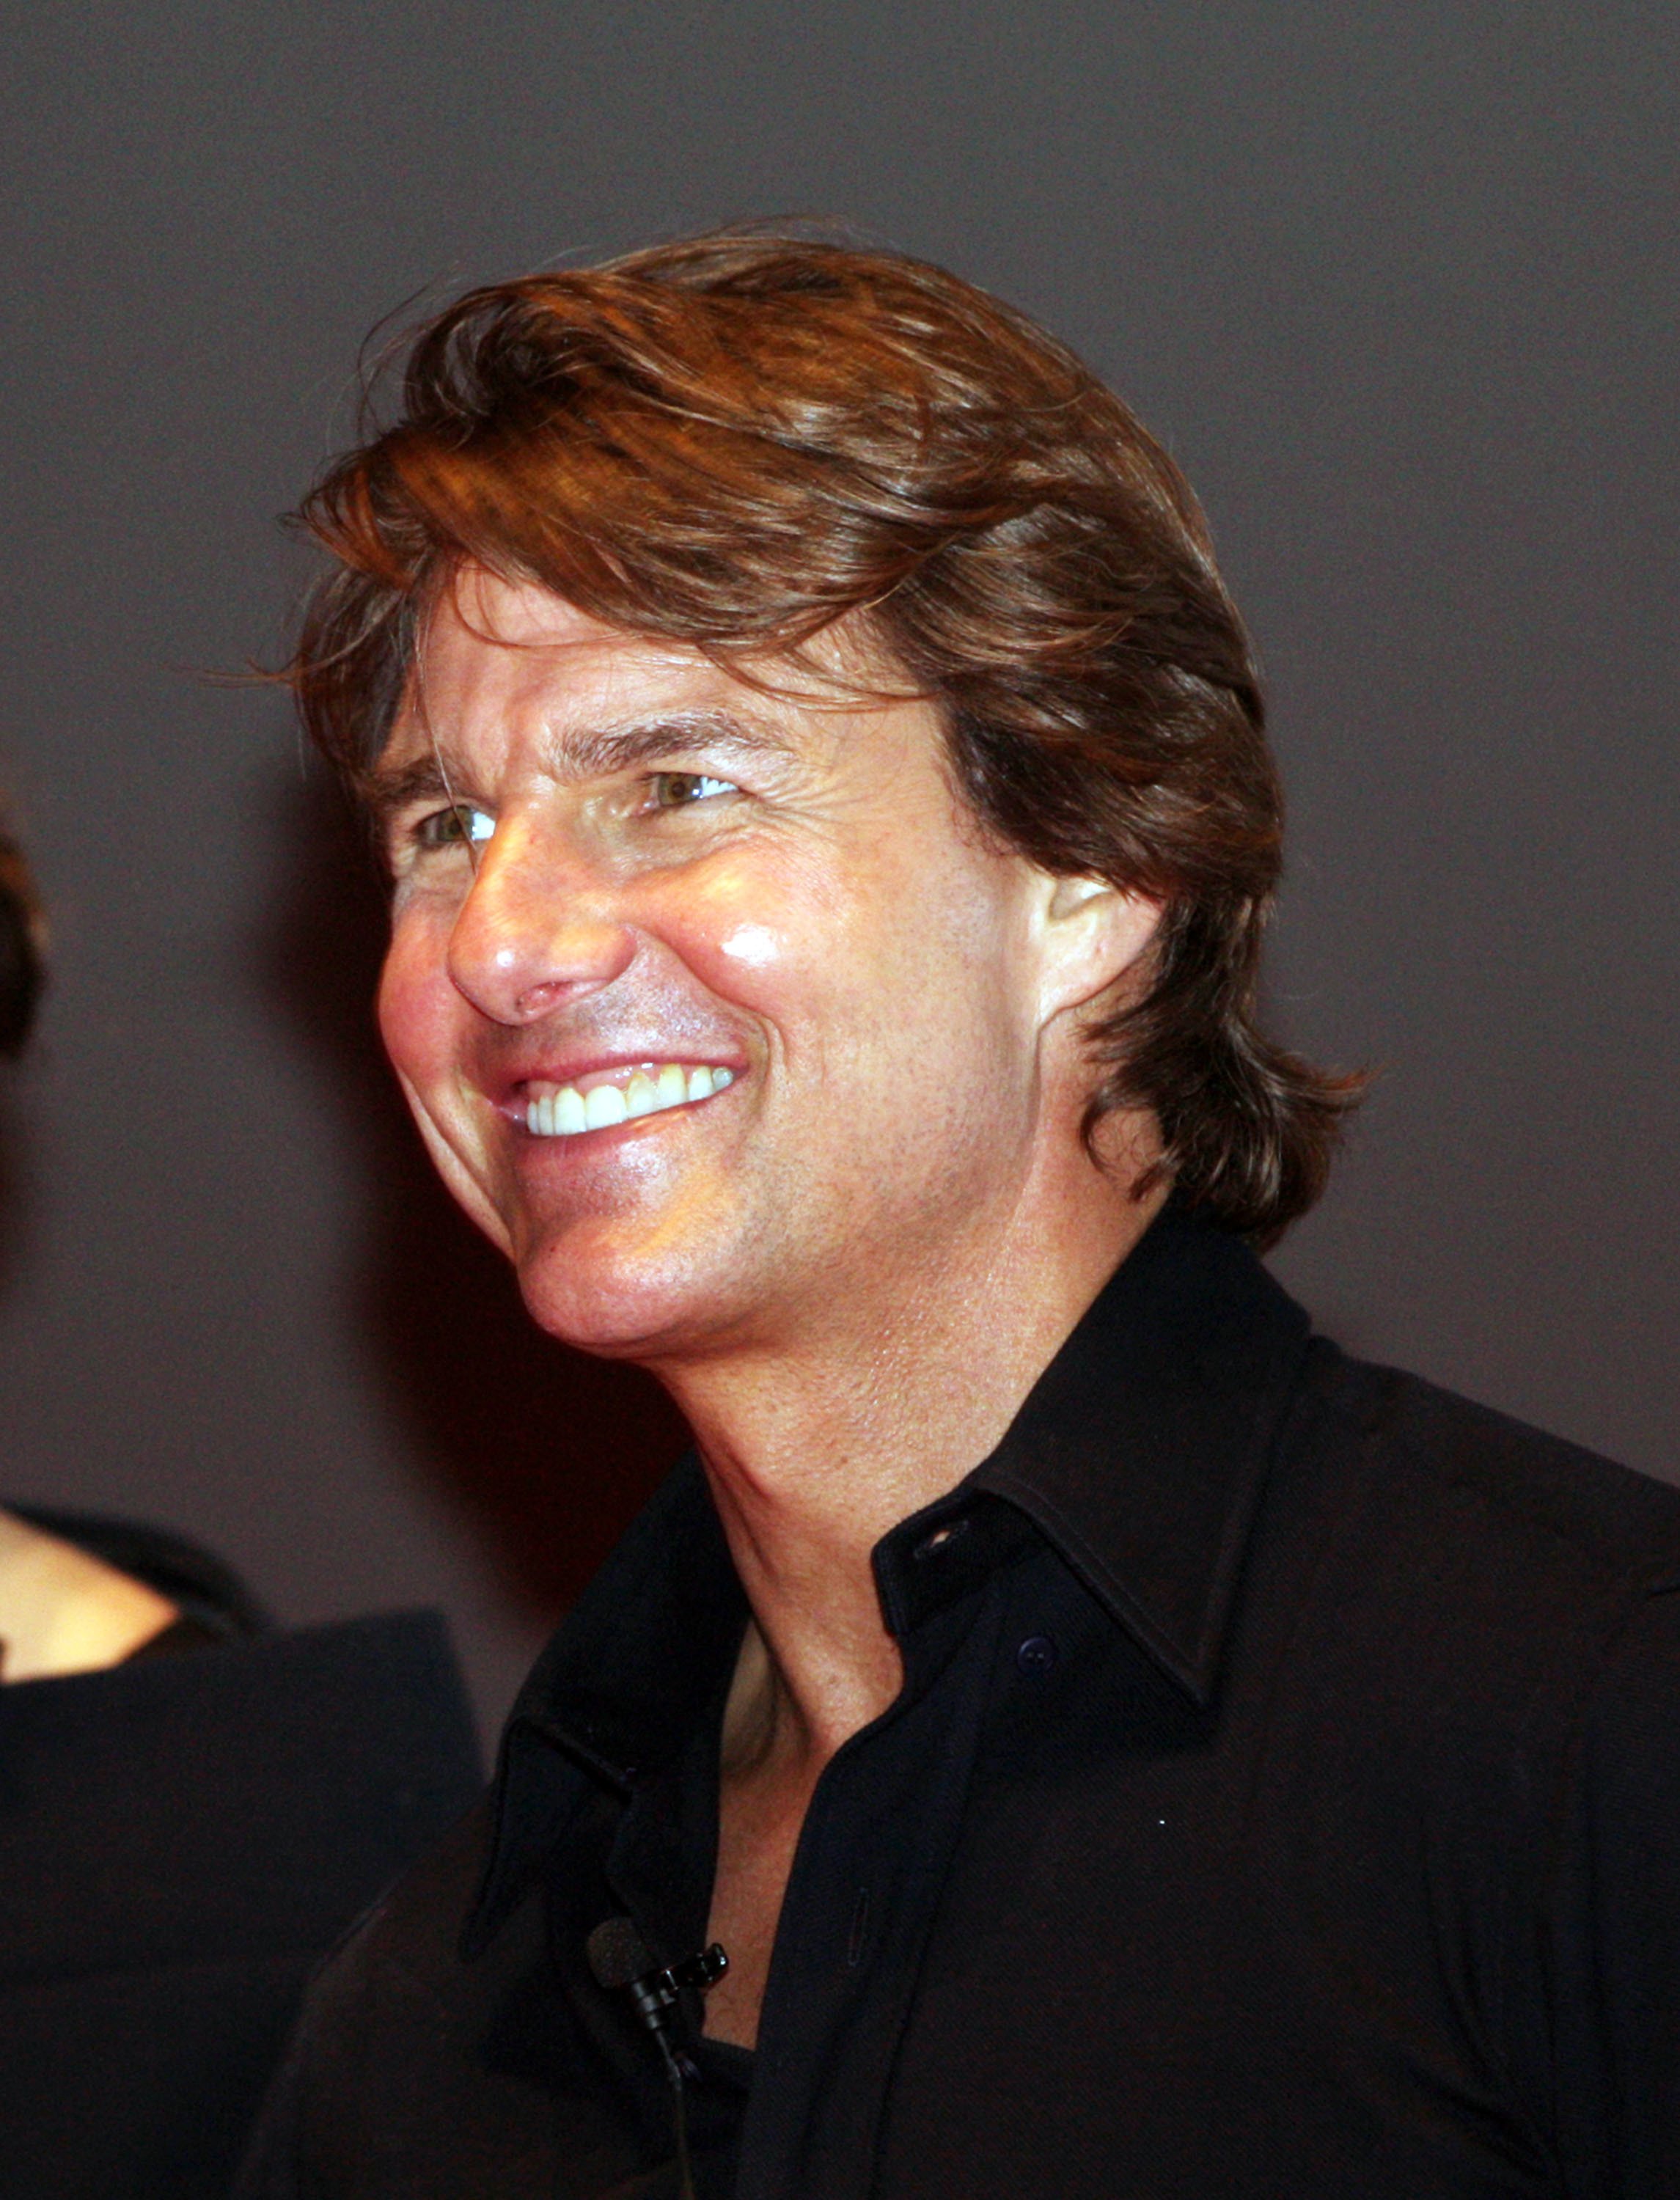 mission-impossible-rogue-nation-shanghai-premiere-sept7-2015-128.jpg